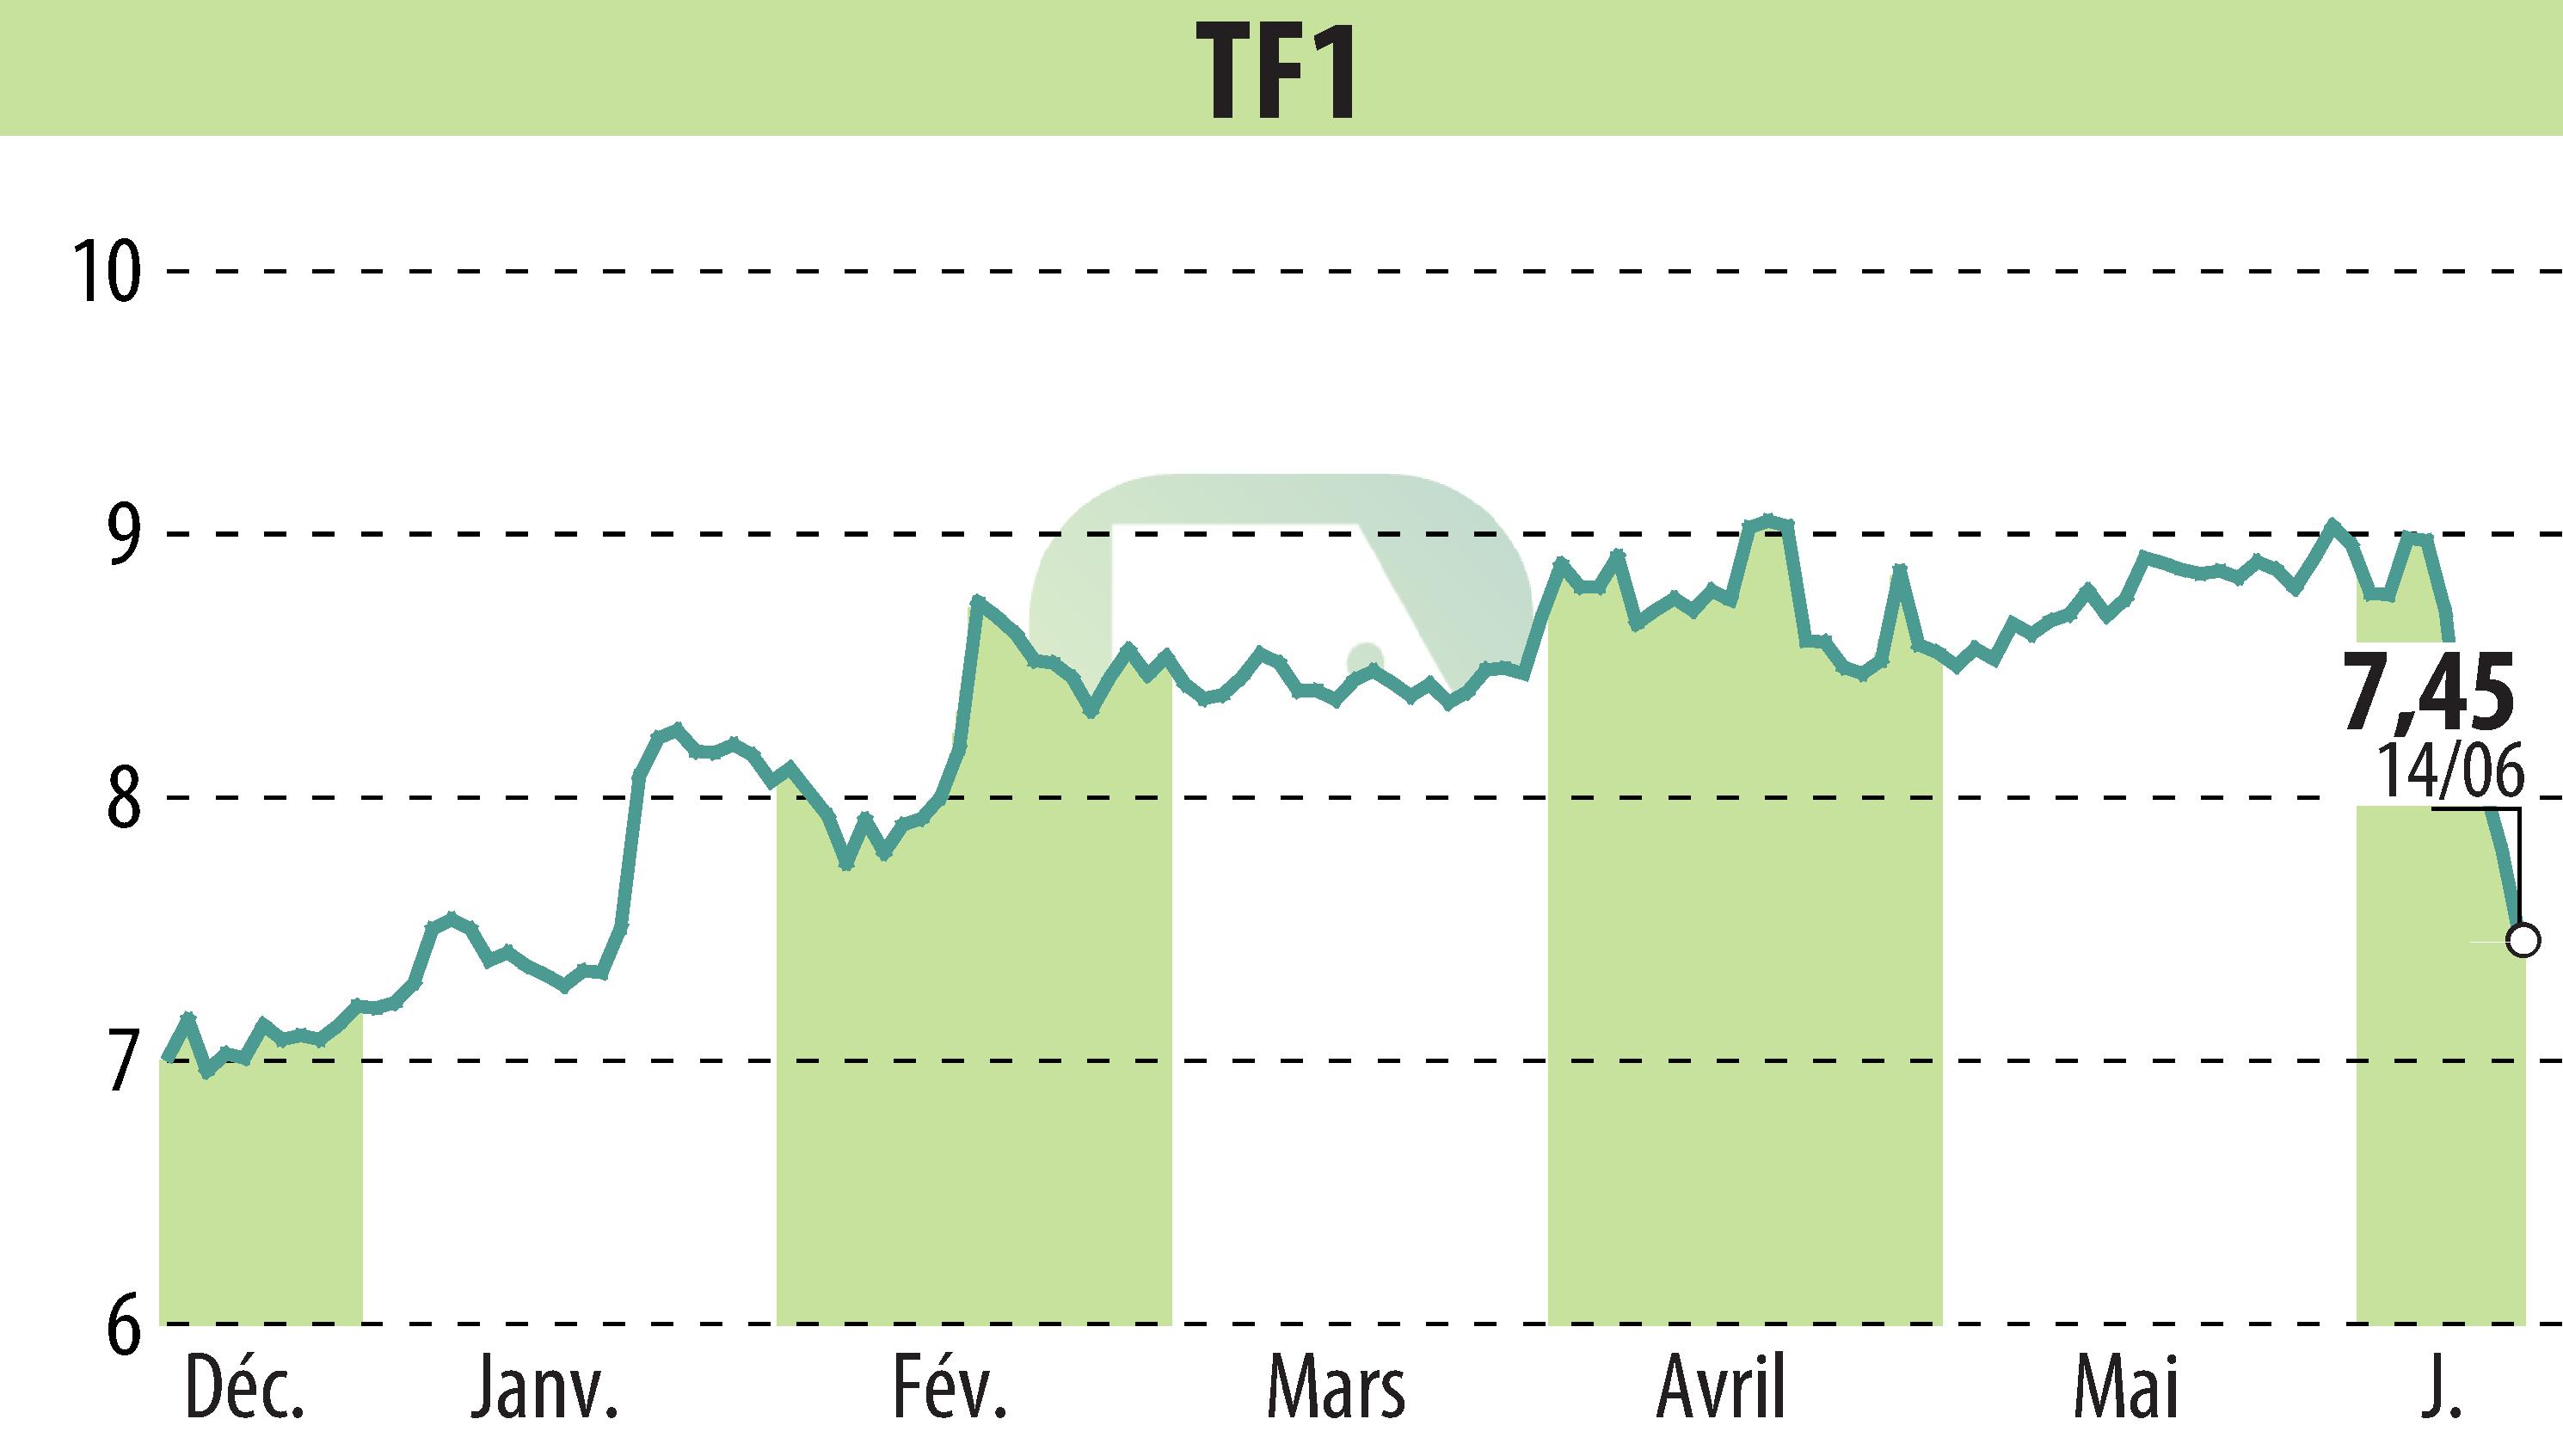 Stock price chart of TF1 (EPA:TFI) showing fluctuations.